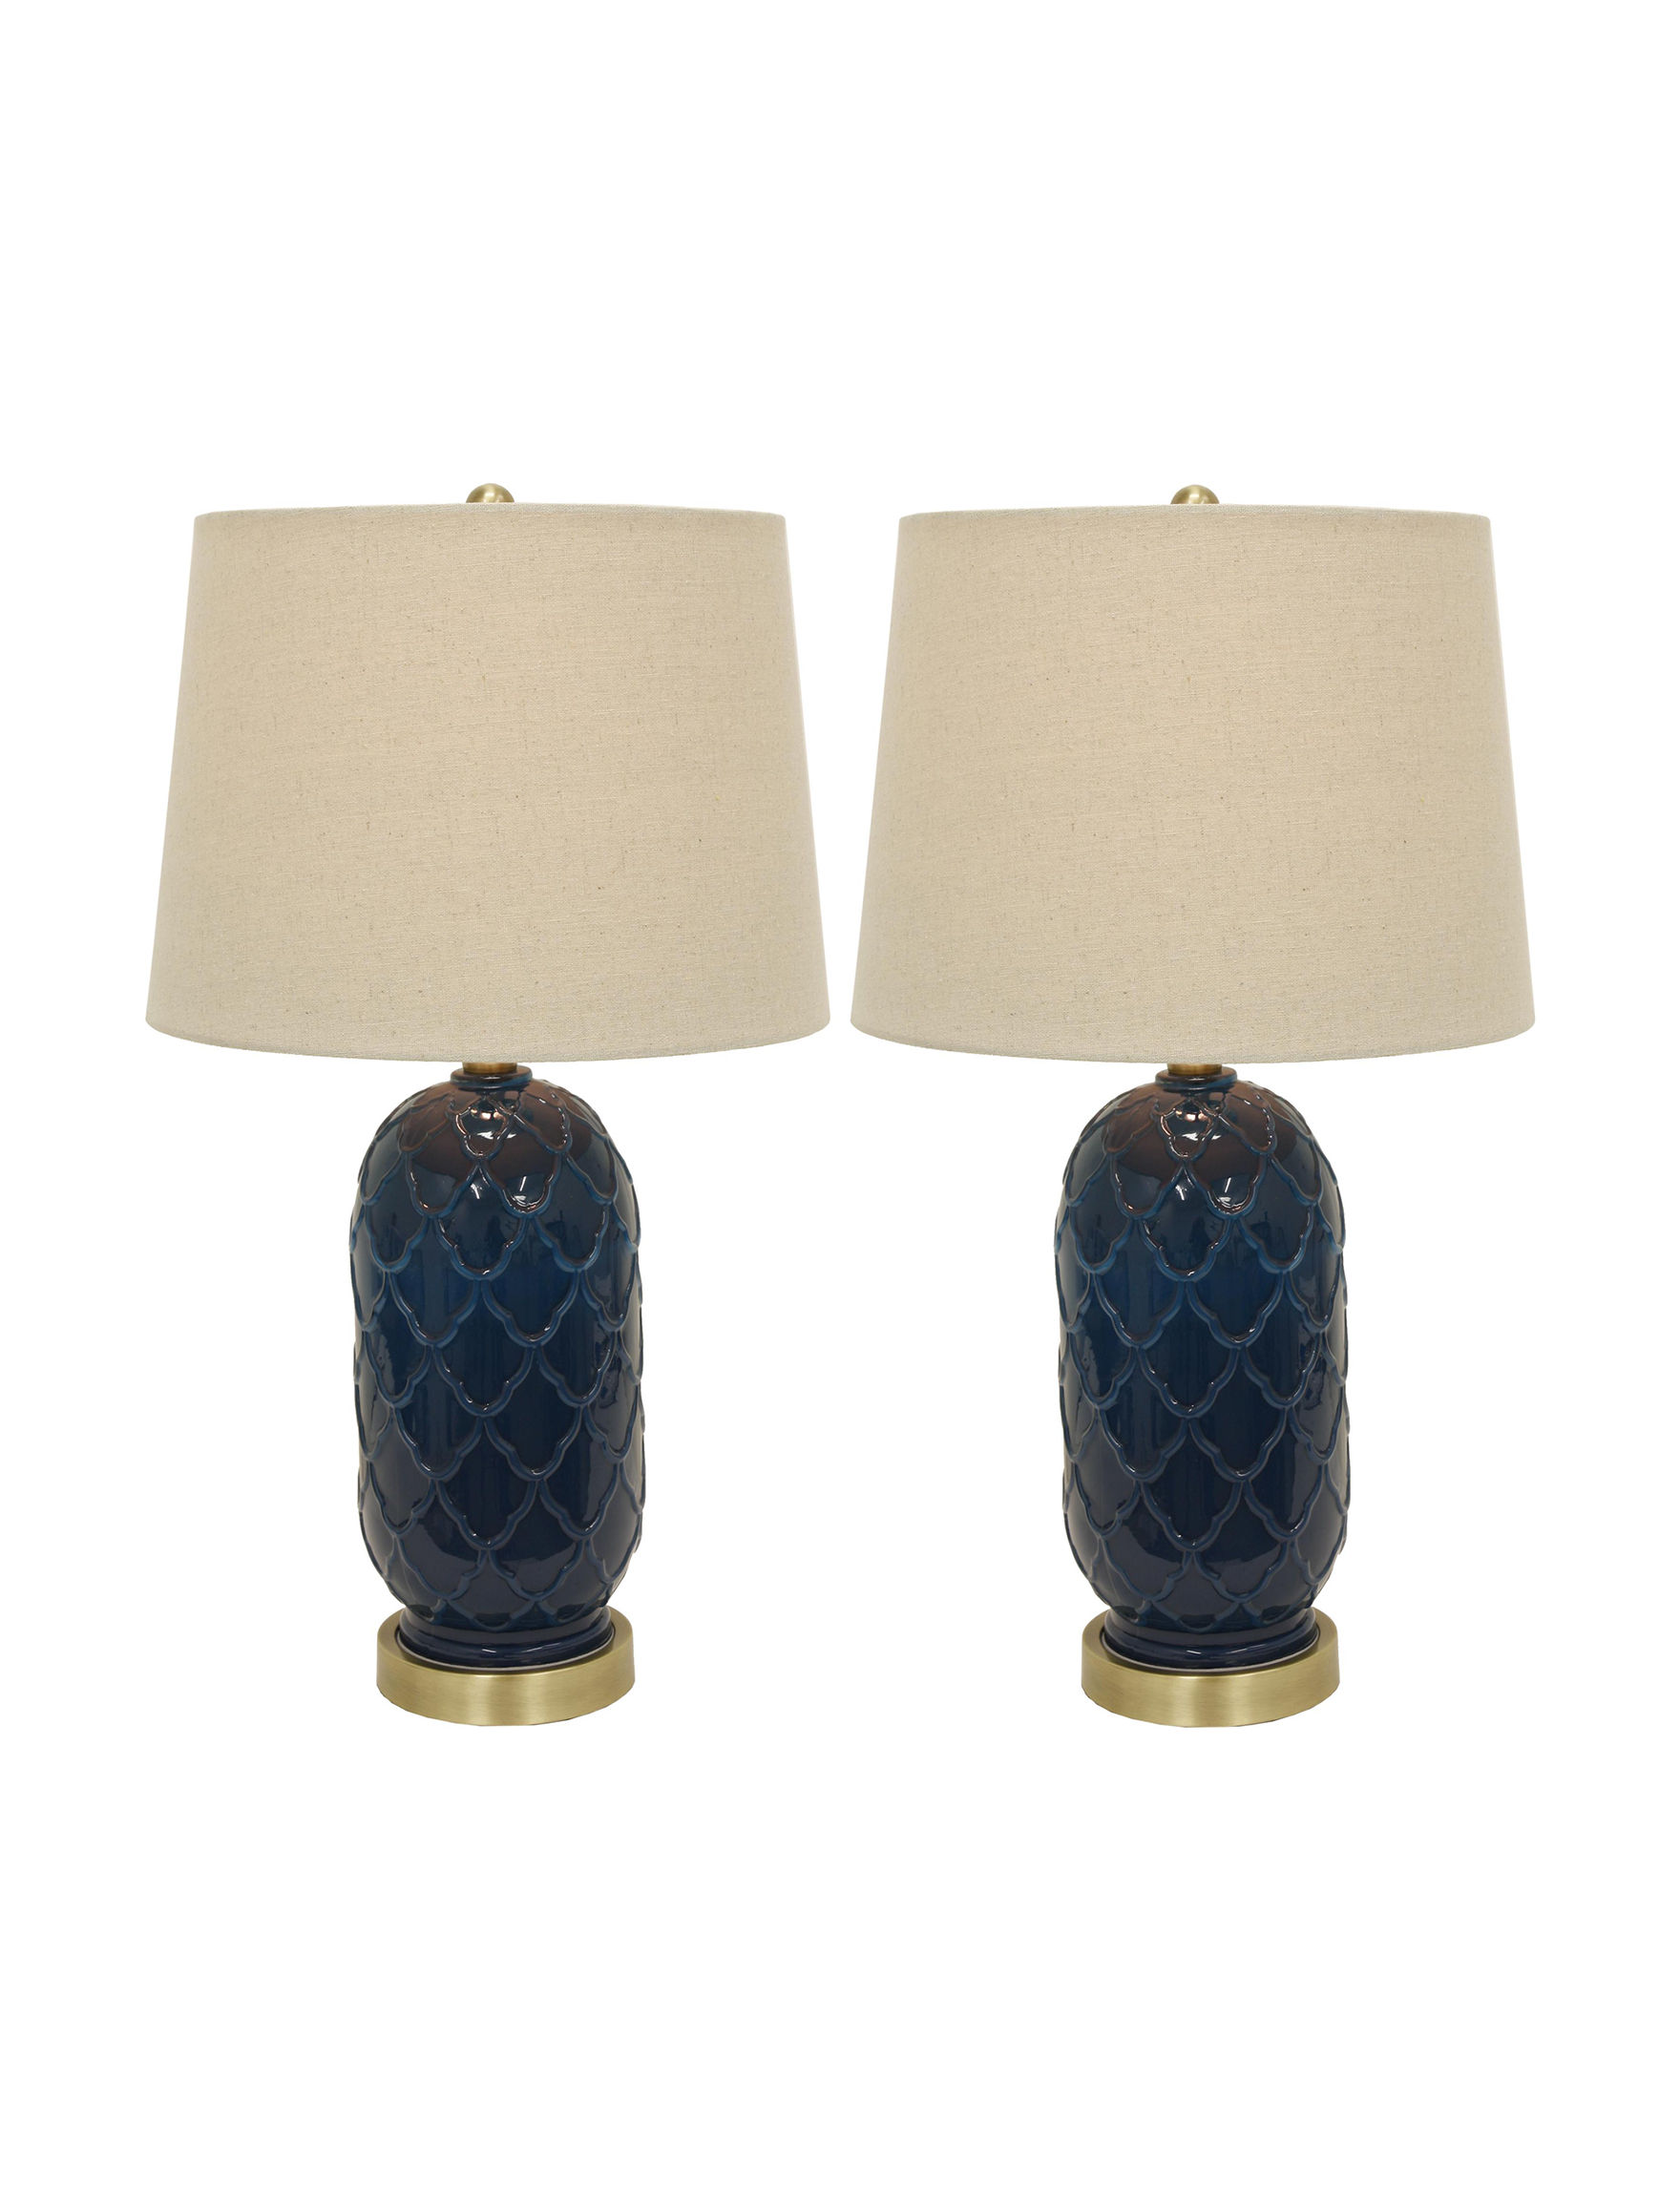 decor therapy set of two embellished quatrefoil glass table lamp